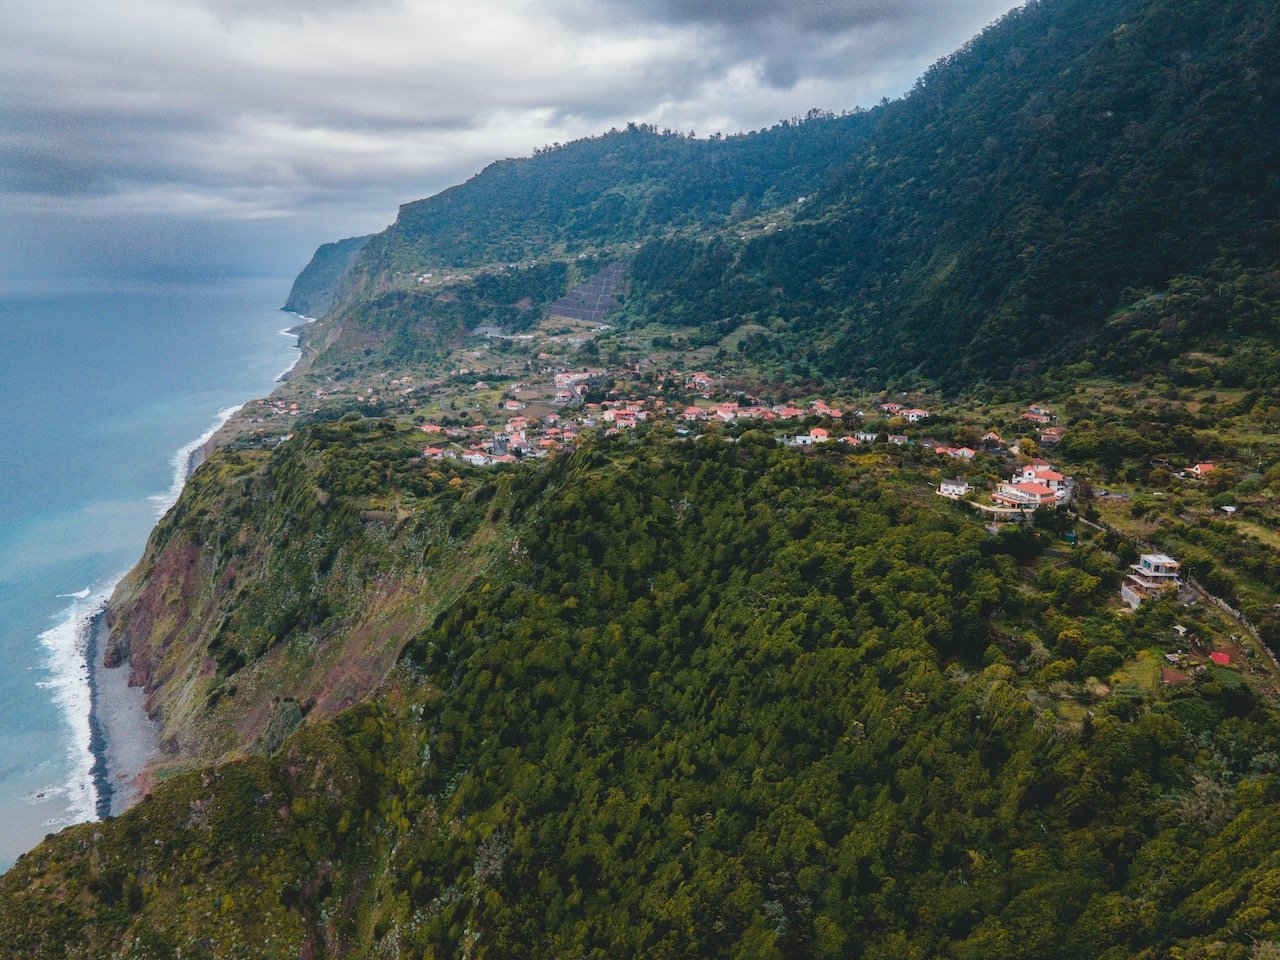   Madeira, the Azores (ISO 200, 4.5 mm,  f /2.8, 1/40 s)  